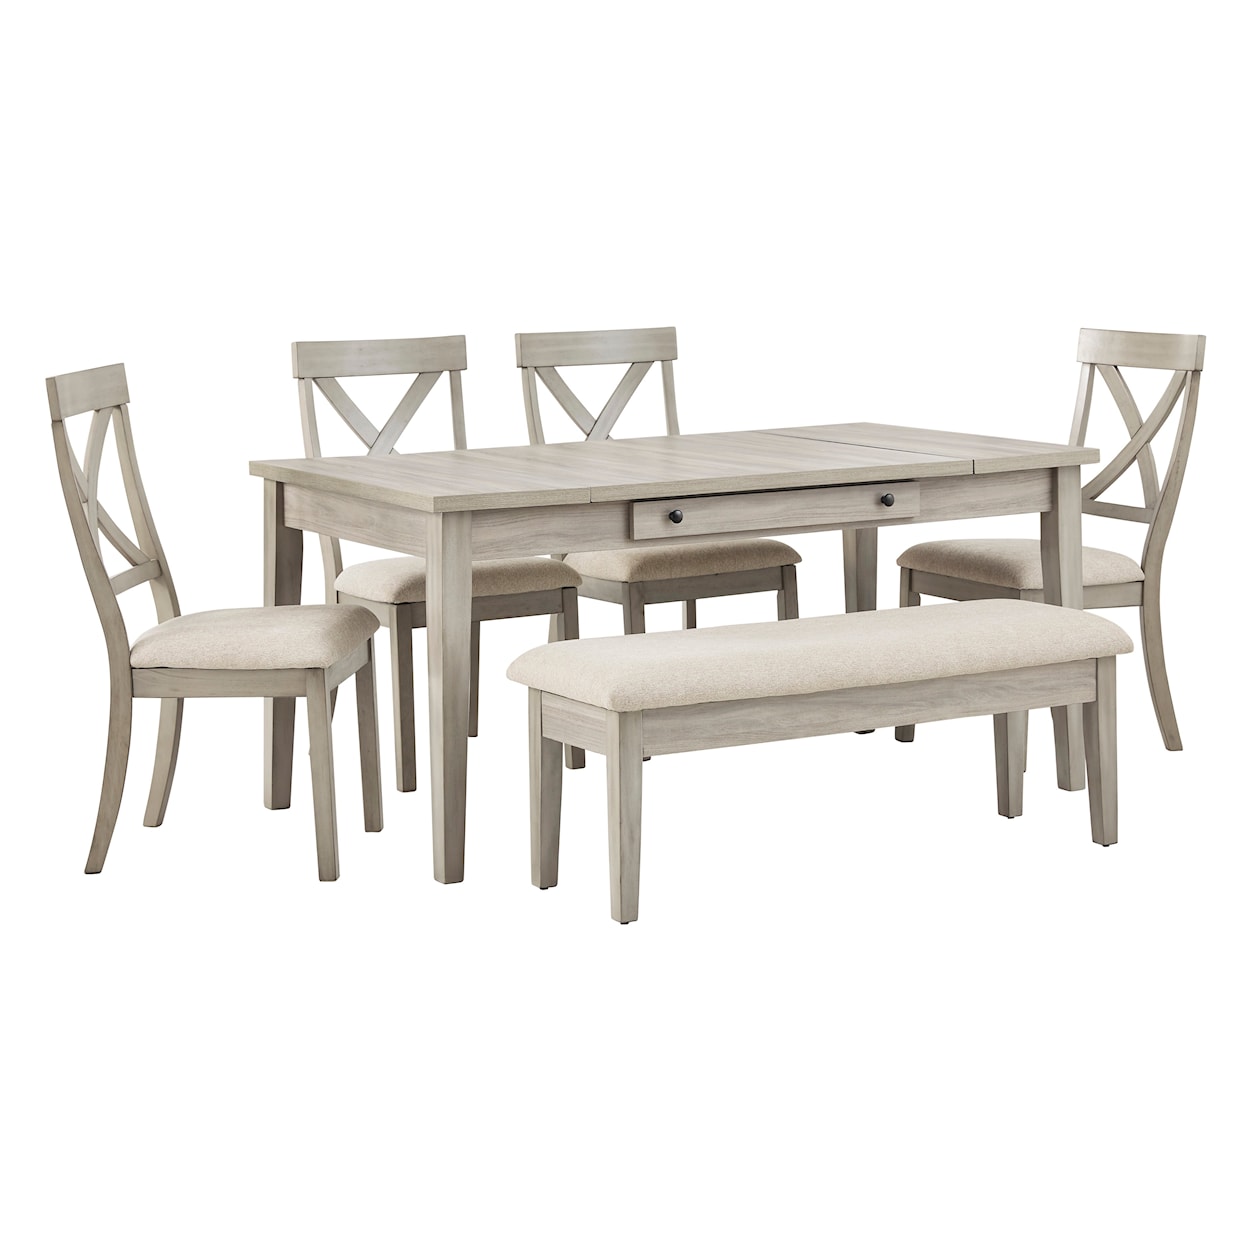 Benchcraft Parellen 6-Piece Table and Chair Set with Bench